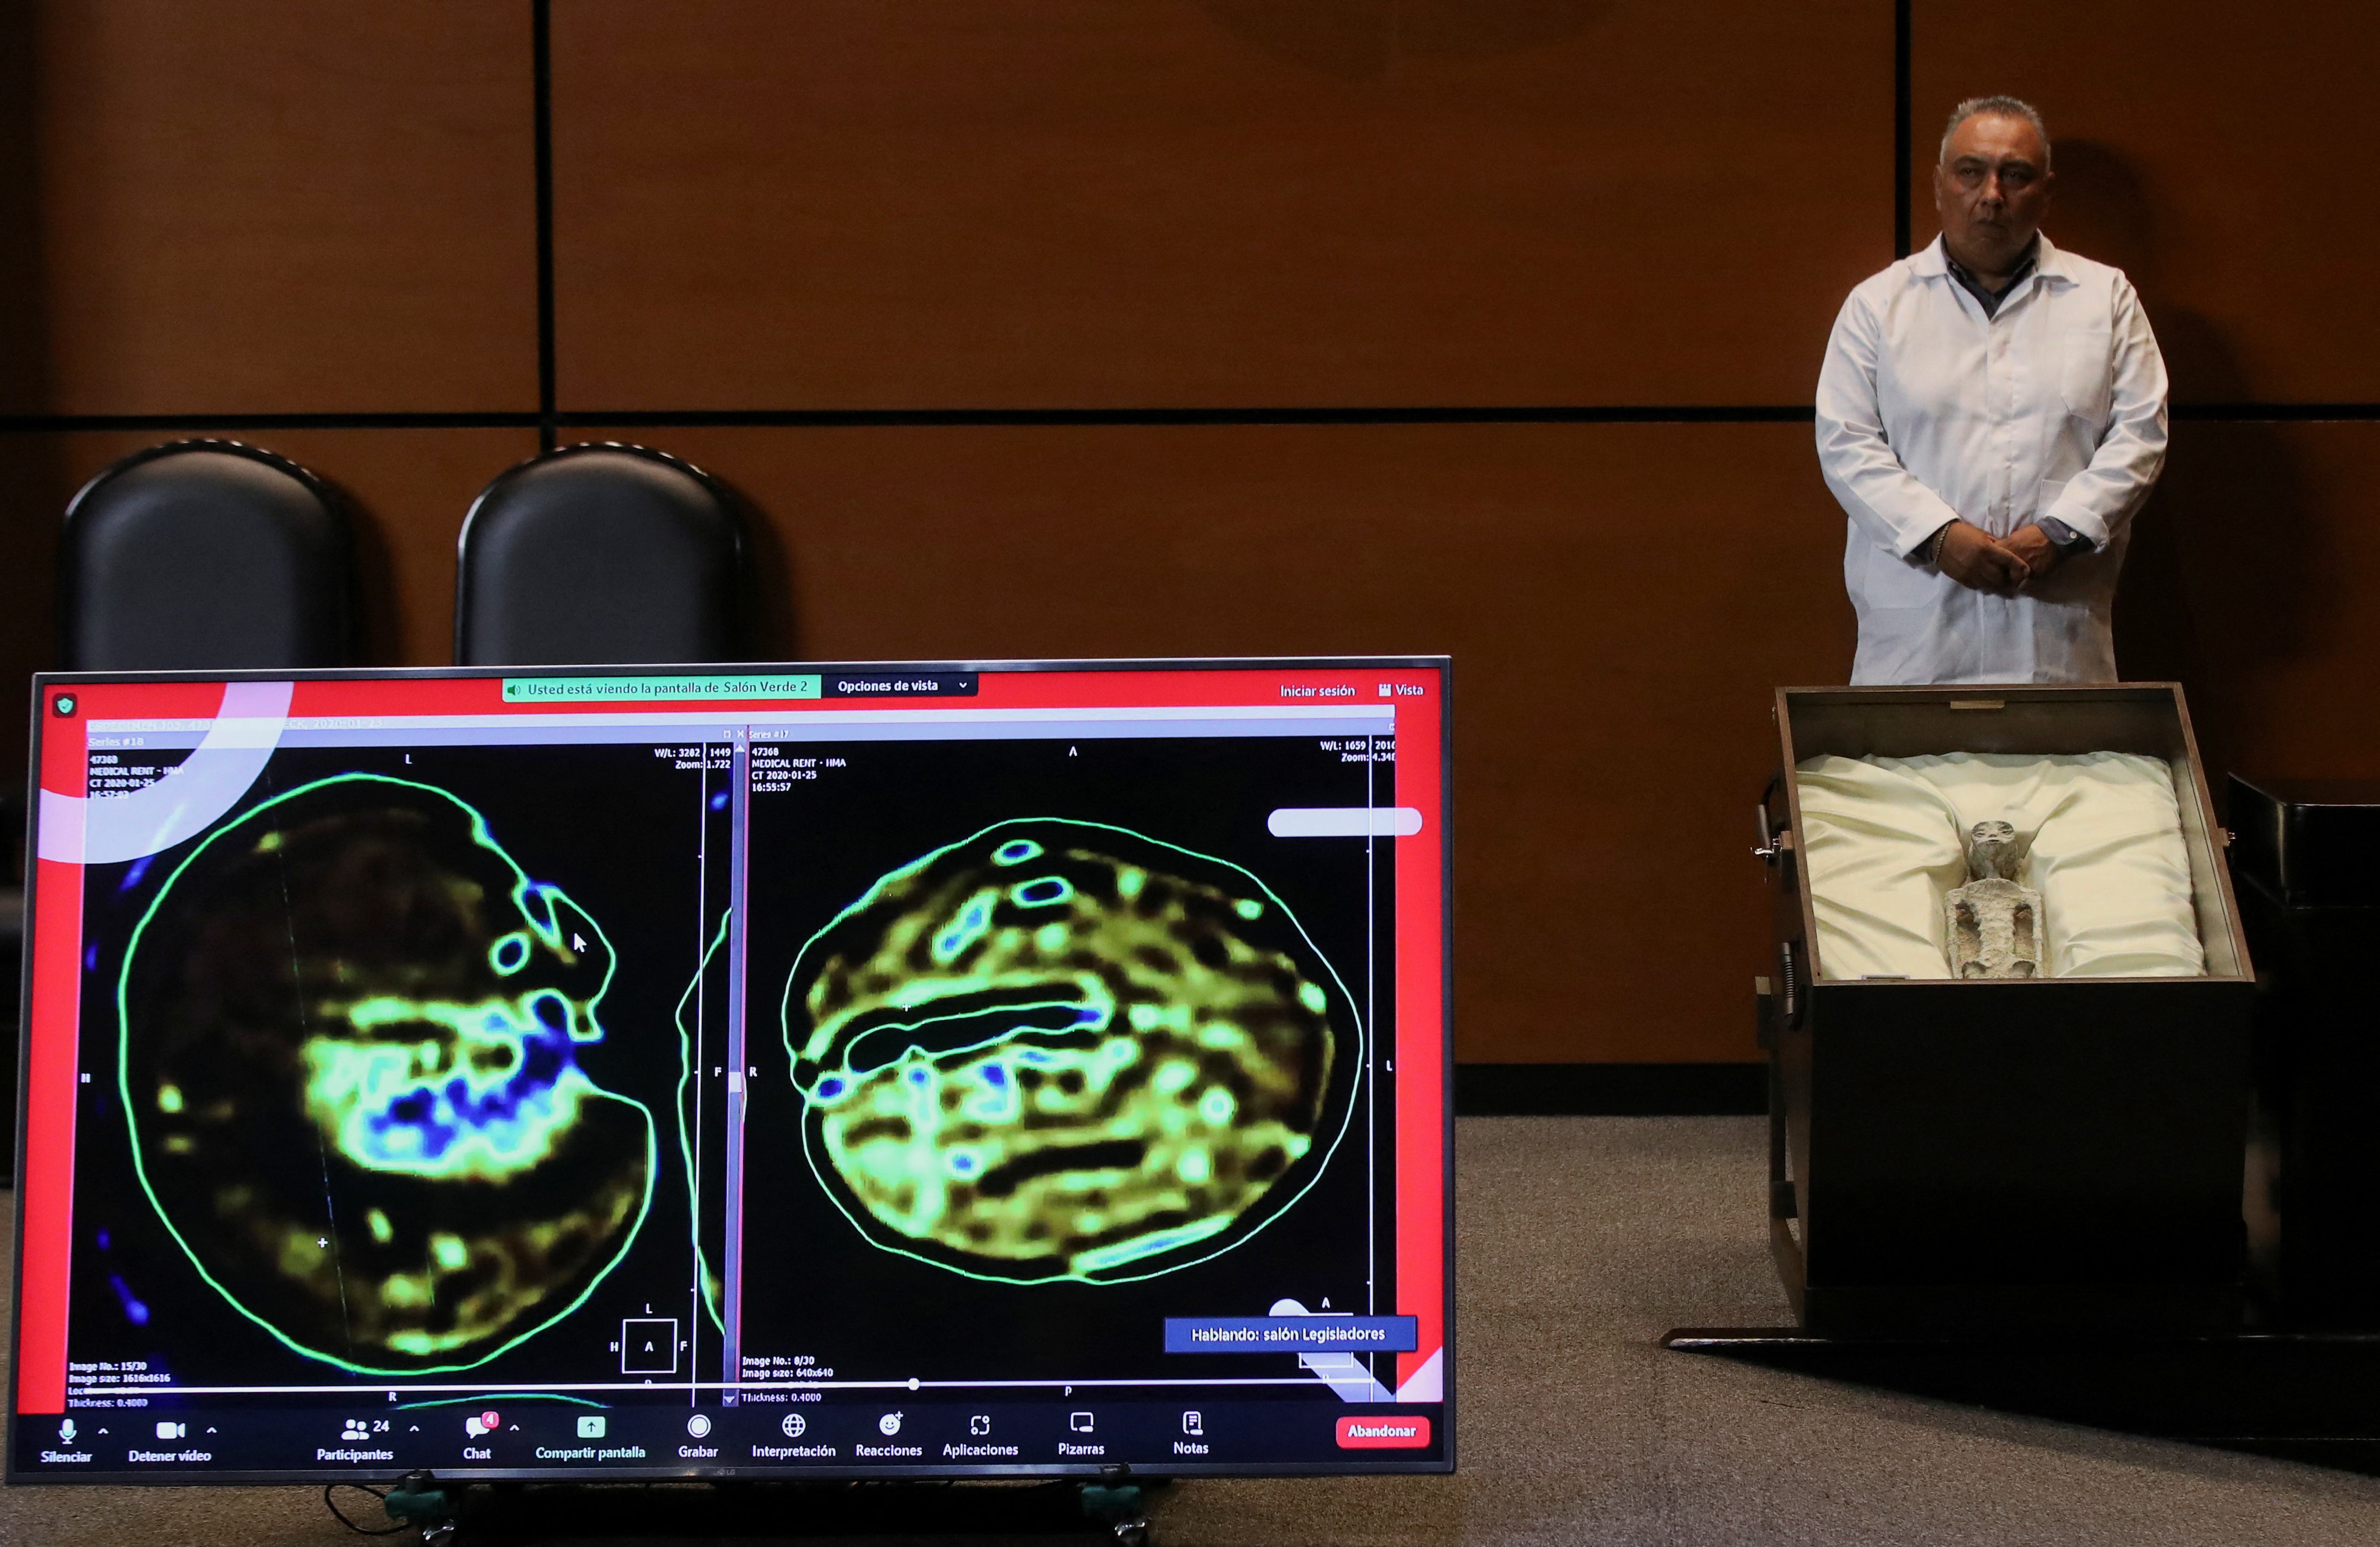 <p>X-rays of the specimens were also shown during the hearing, with experts testifying under oath that one of the bodies is seen to have “eggs” inside</p>